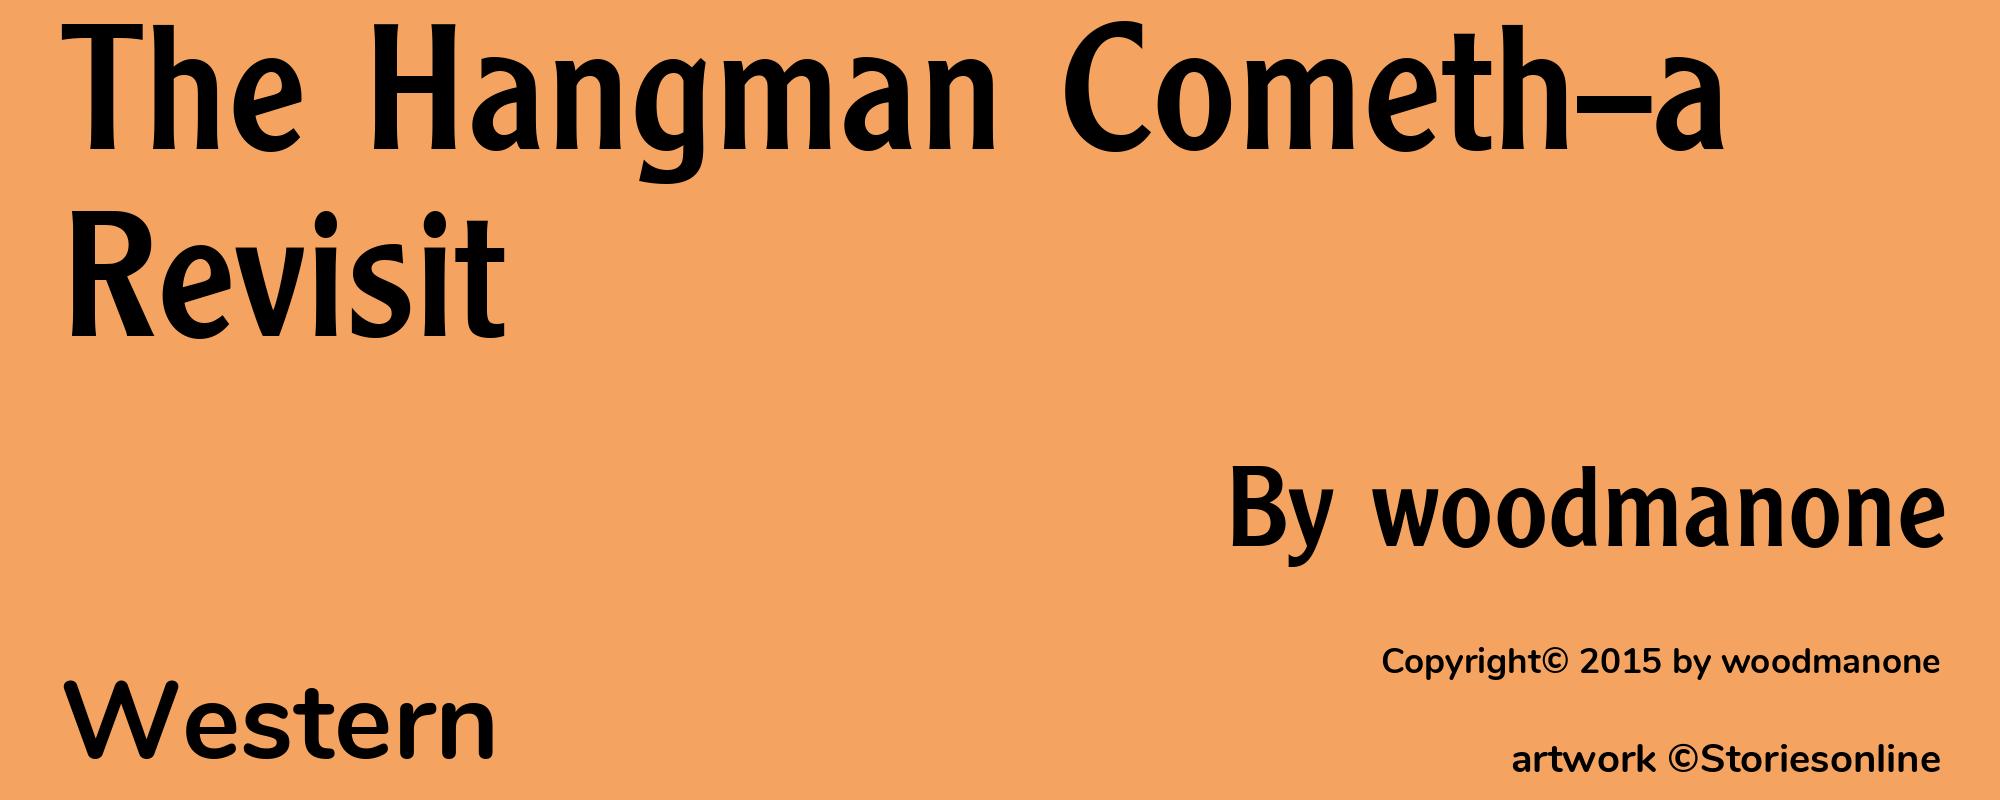 The Hangman Cometh--a Revisit - Cover